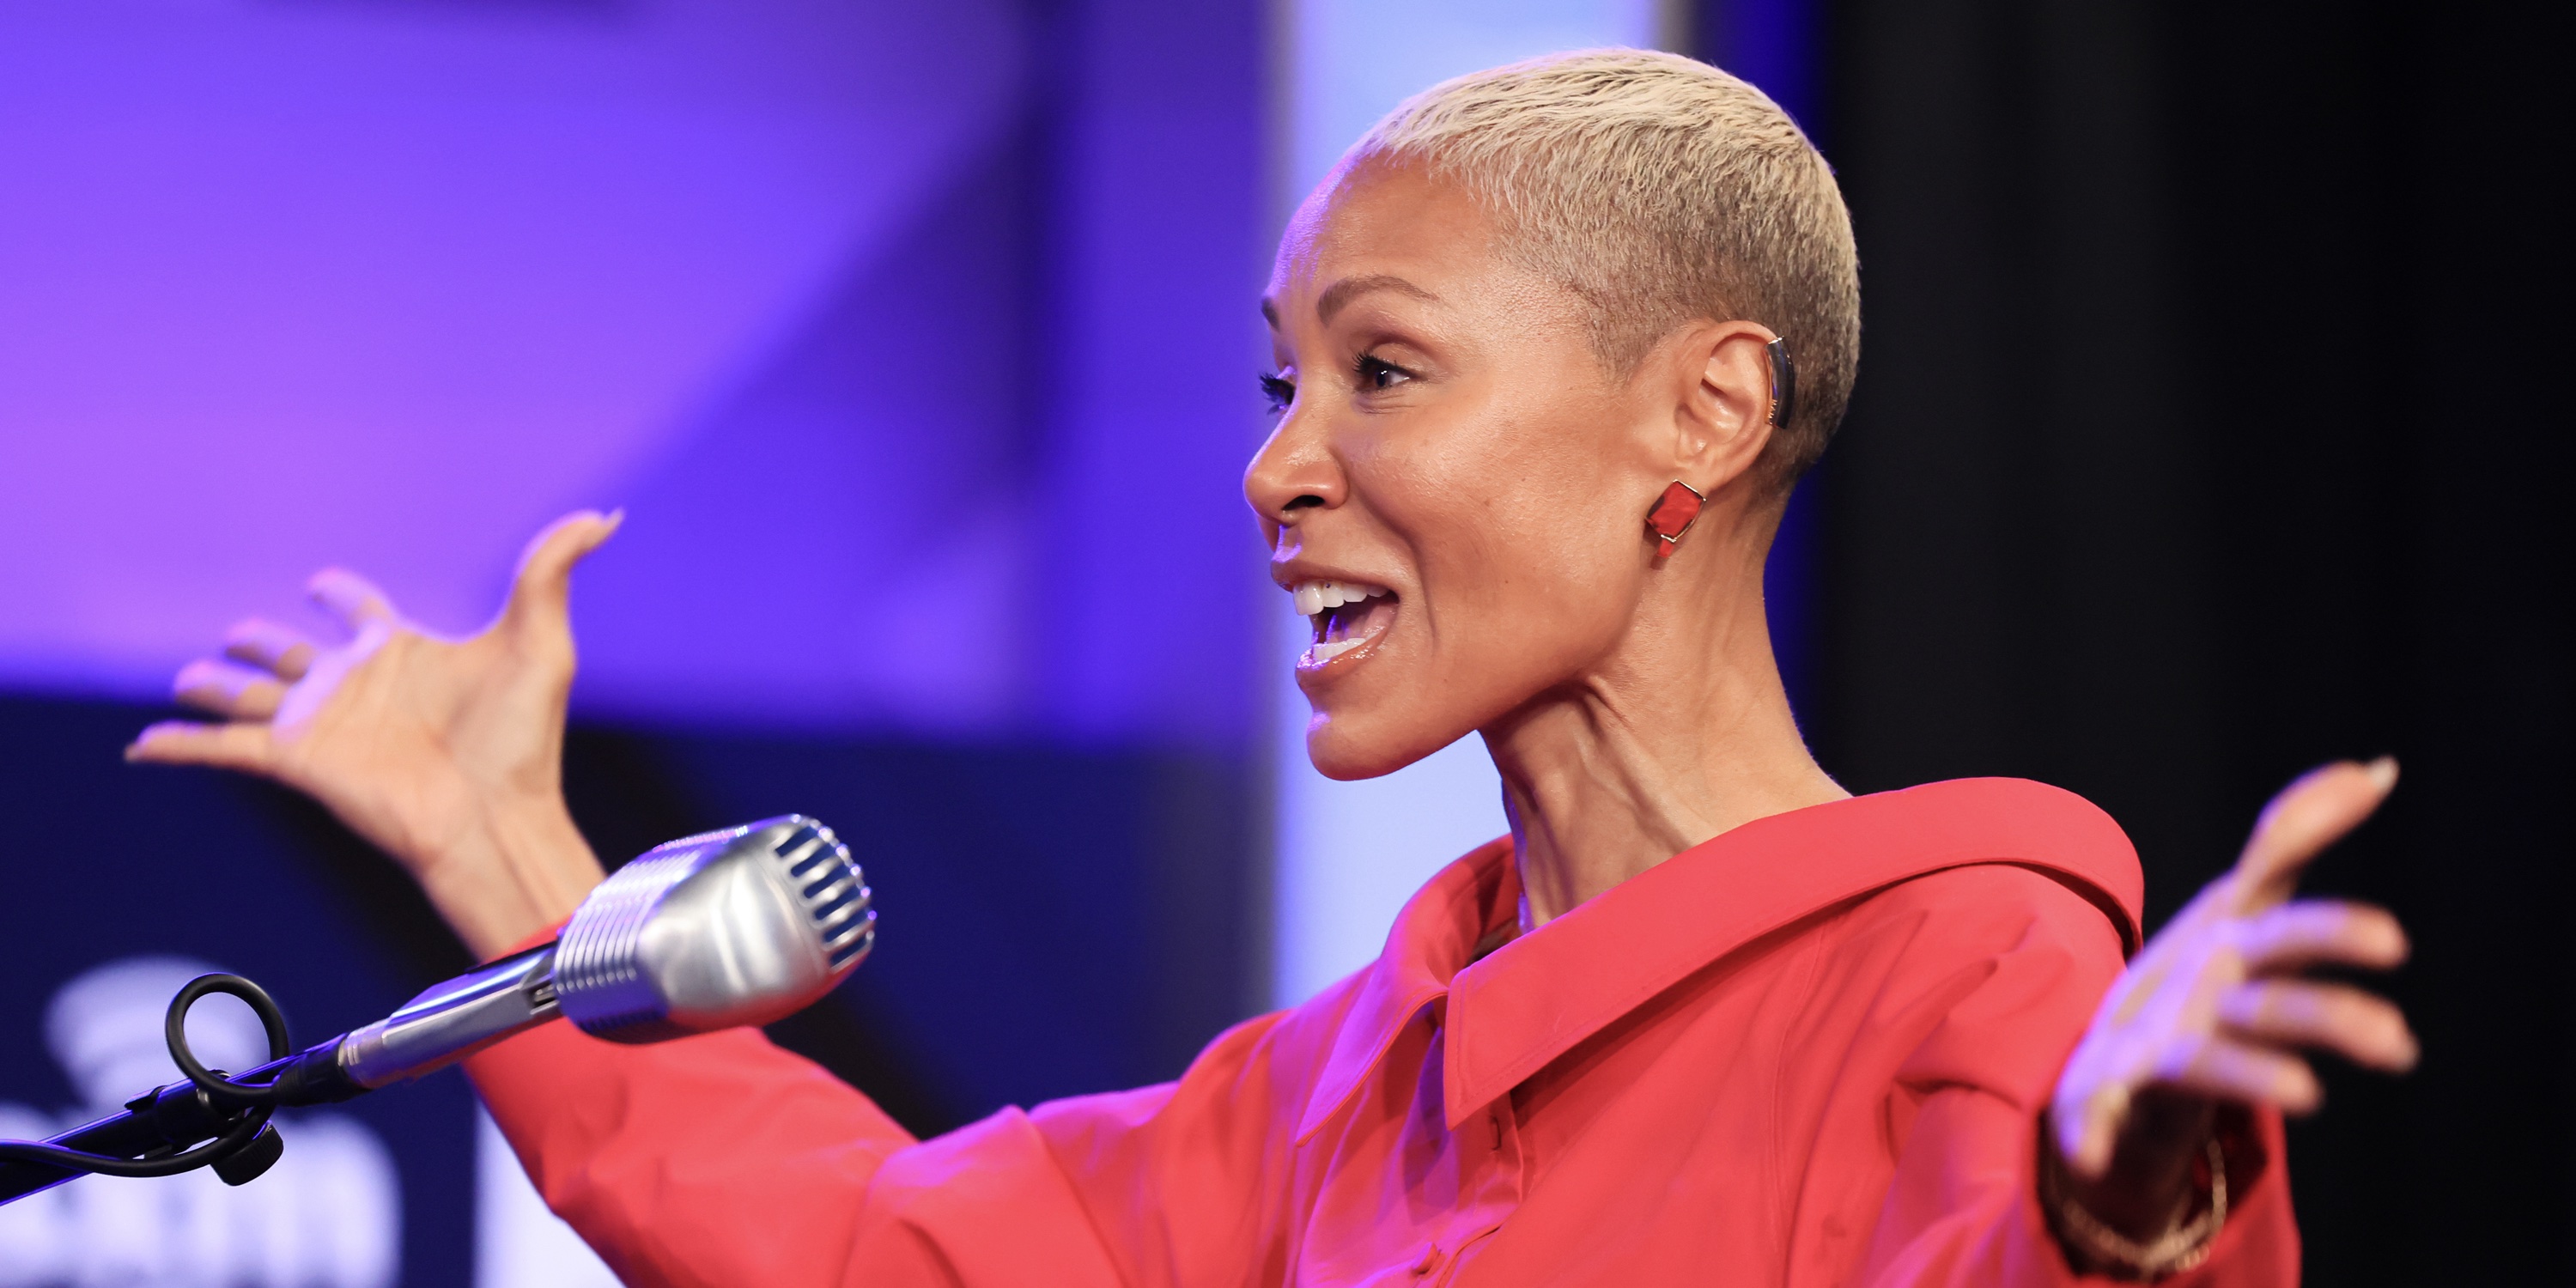 LOS ANGELES, CALIFORNIA - OCTOBER 04: In this image released on October 17th, Jada Pinkett Smith visits the SiriusXM Studios on October 04, 2023 in Los Angeles, California. (Photo by Rodin Eckenroth/Getty Images)